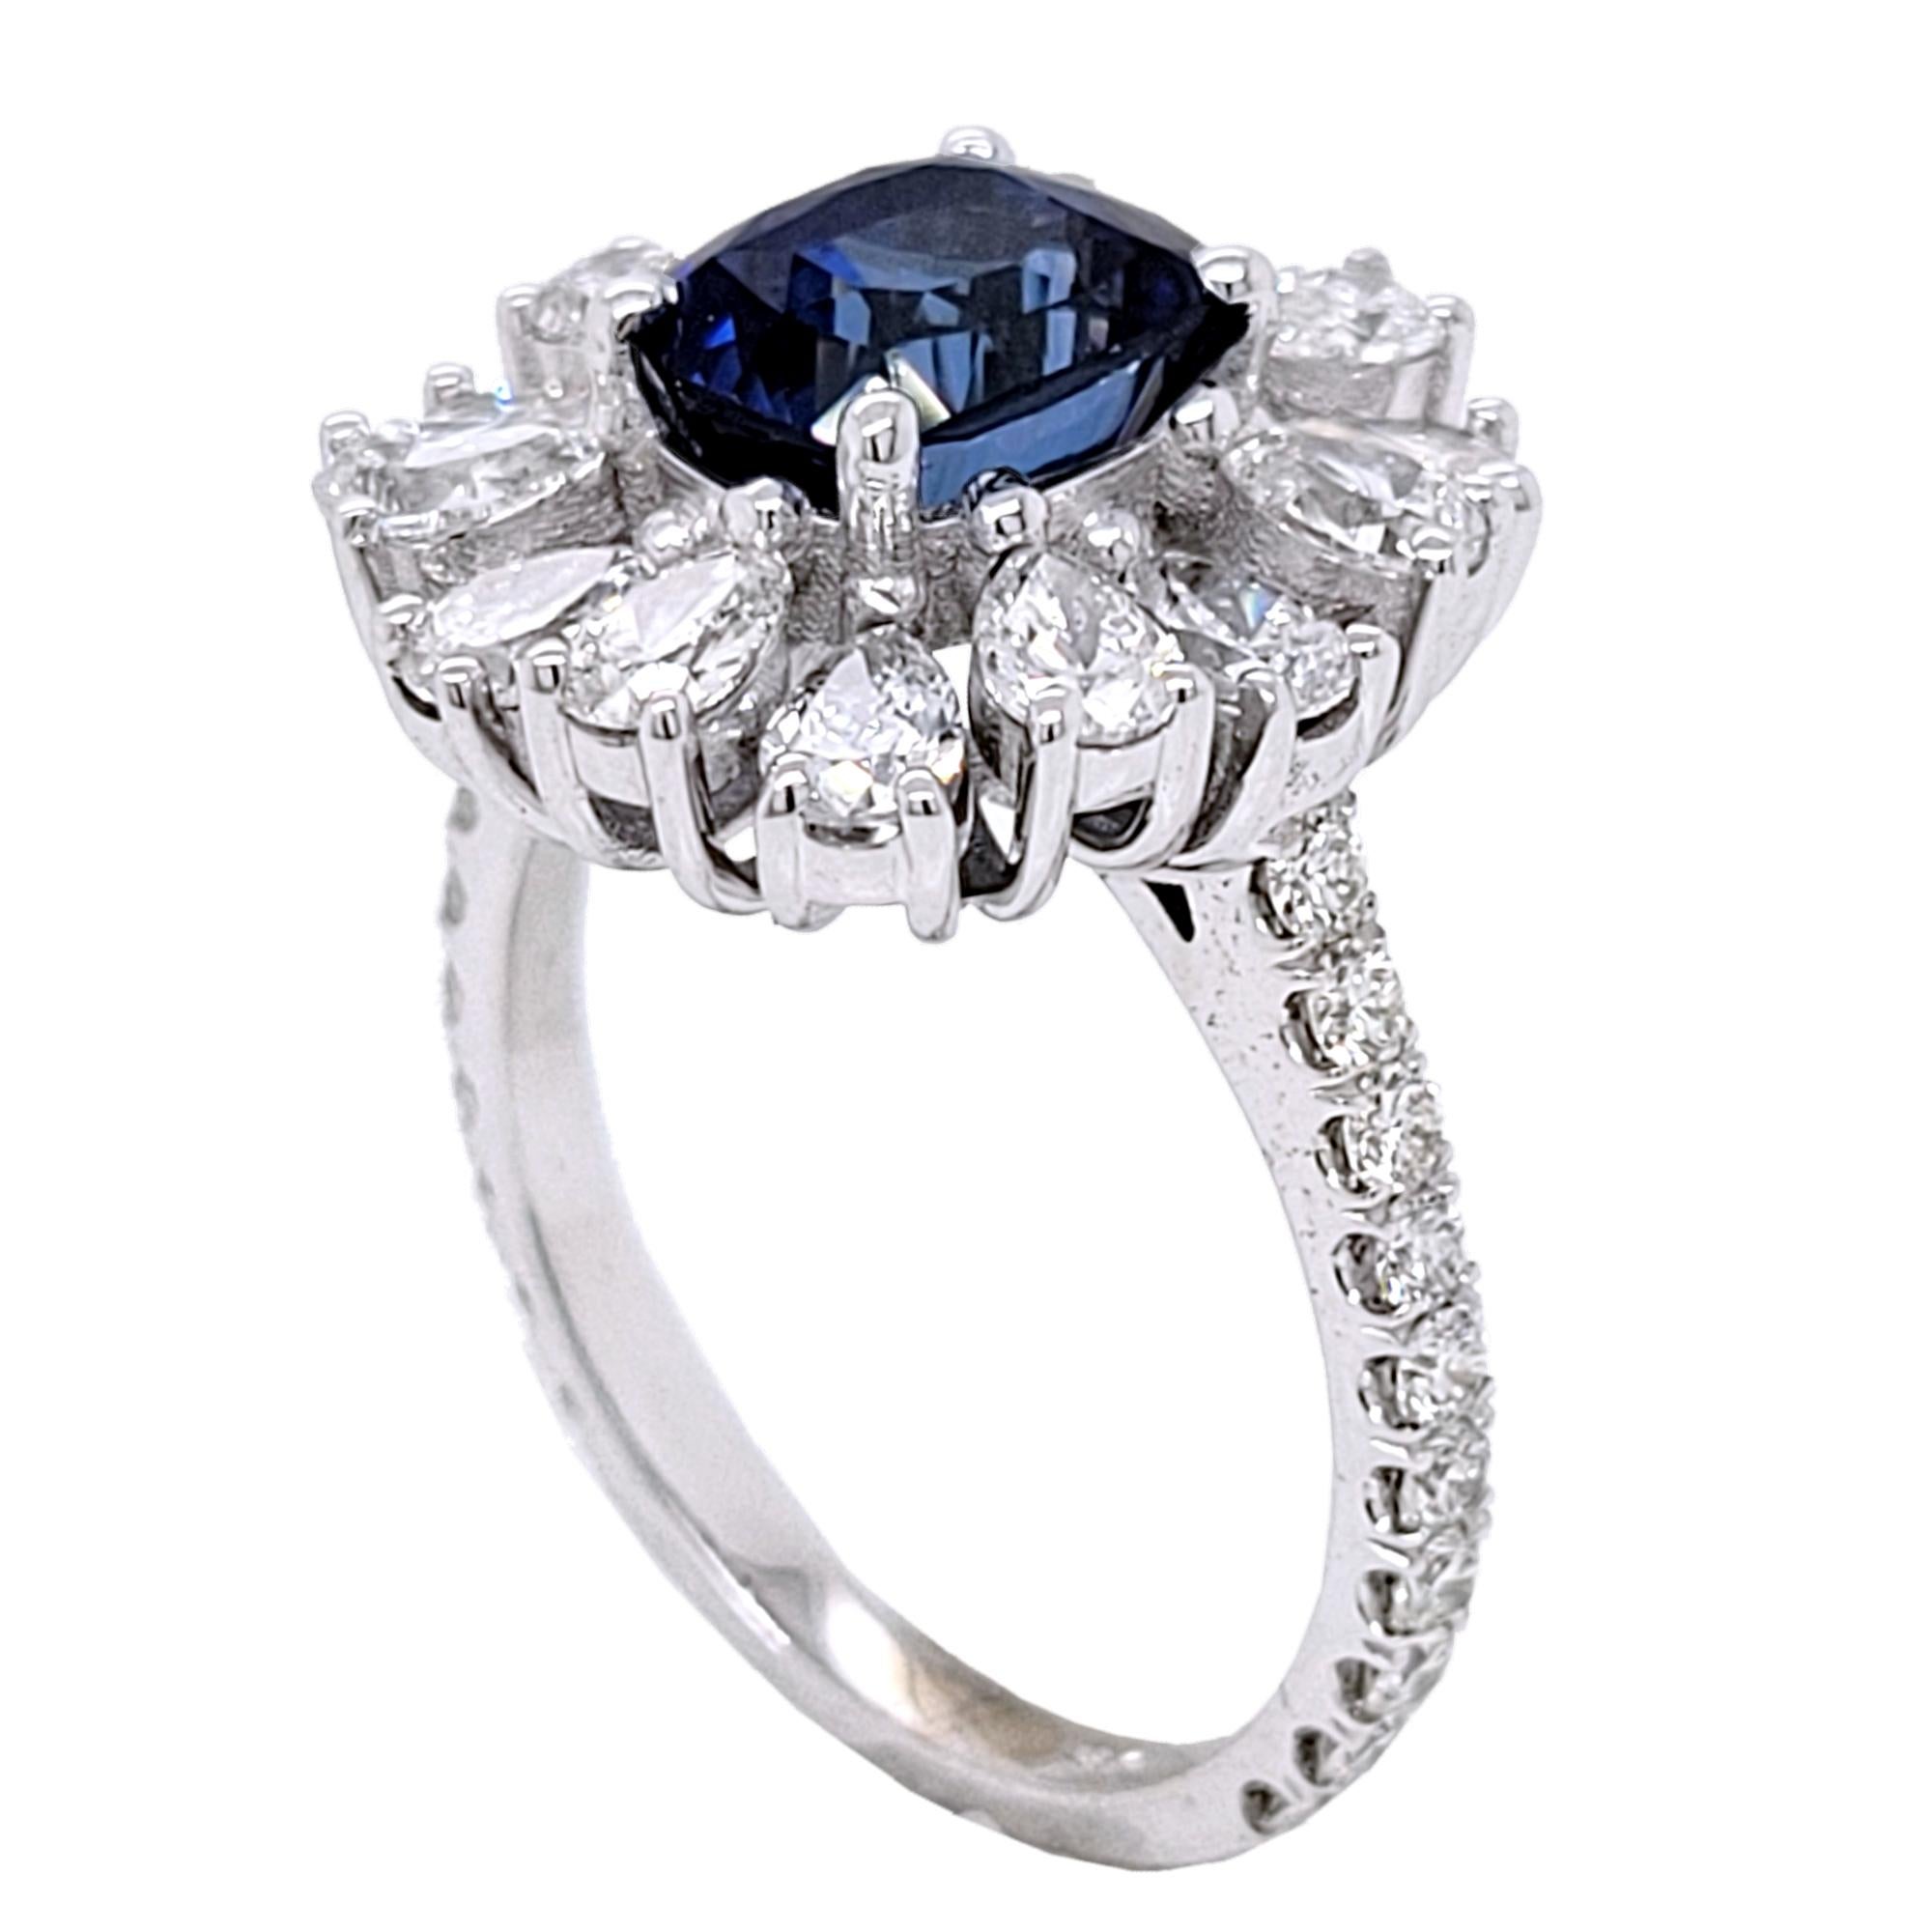 A  Beautiful Color 2.53 Ct Cushion Shaped Sapphire set in a gorgeous 18k gold  Pave set engagement Ring with halo of Pear Shape Diamonds. Total diamond weight of 1.86 Ct. diamonds on the side. 

Center stone: 2.53 Ct Cushion Shape Sapphire
Side